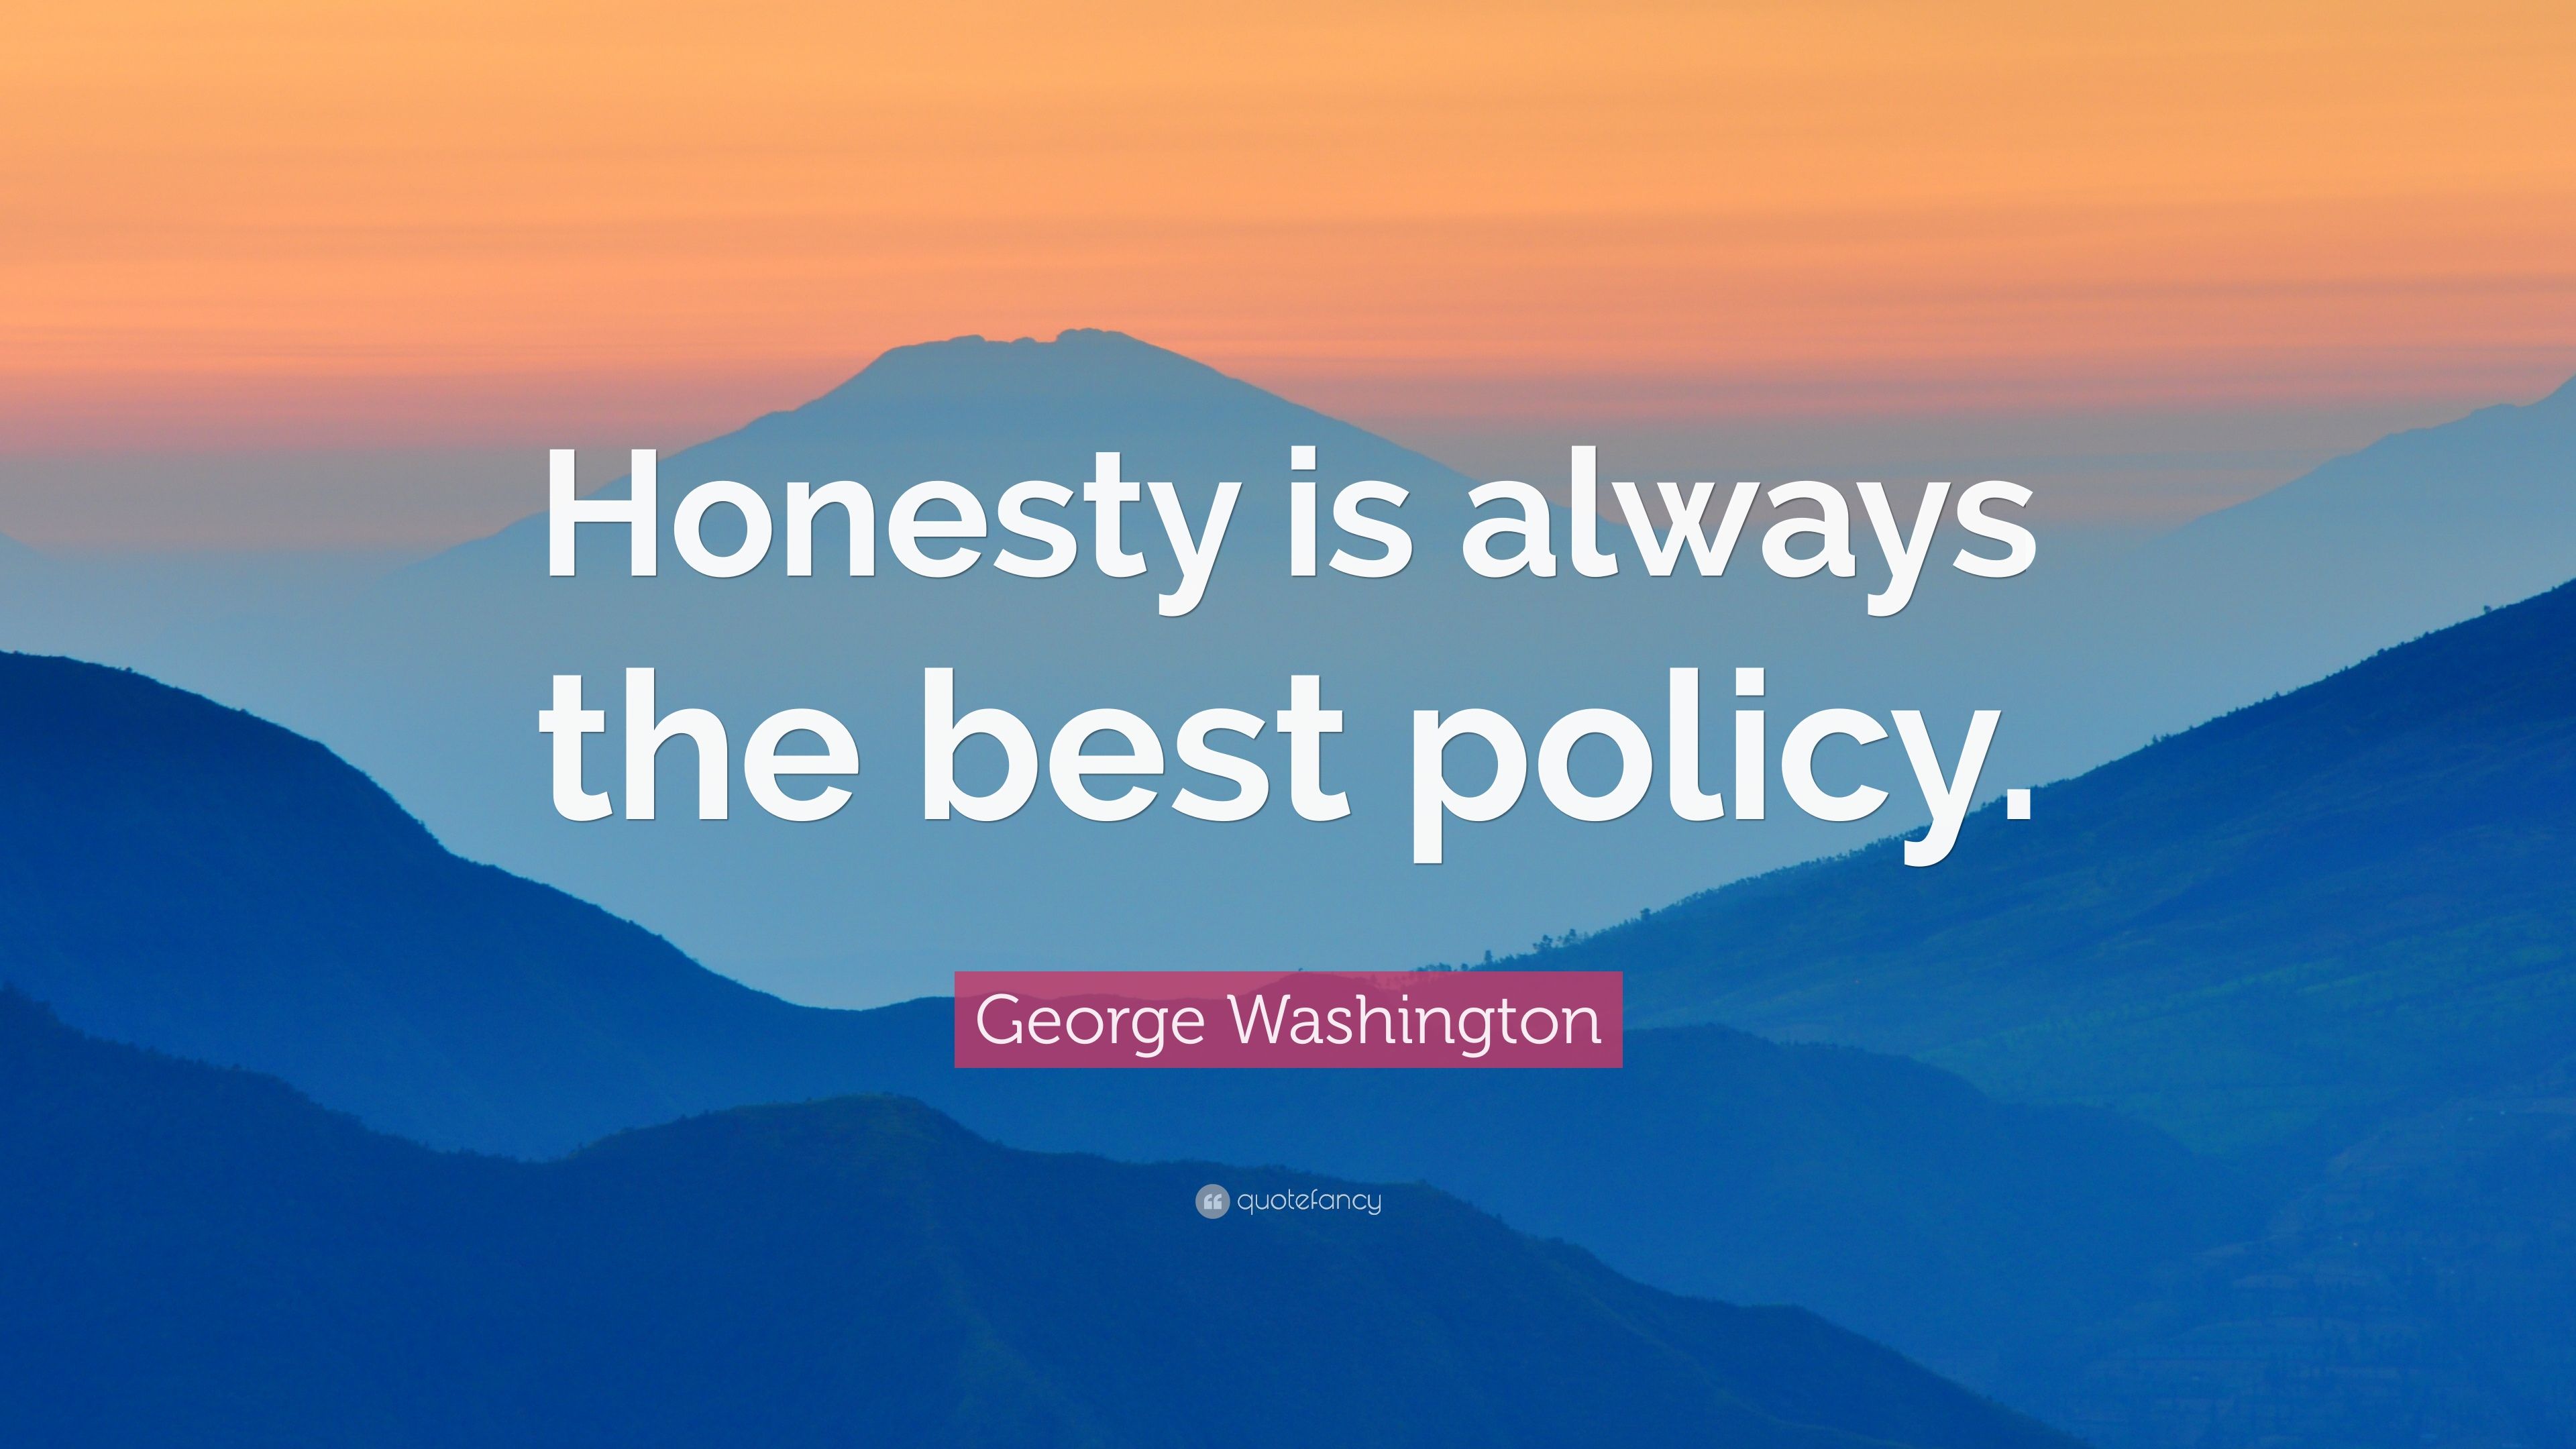 George Washington Quote: “Honesty is always the best policy.” (12 wallpaper)